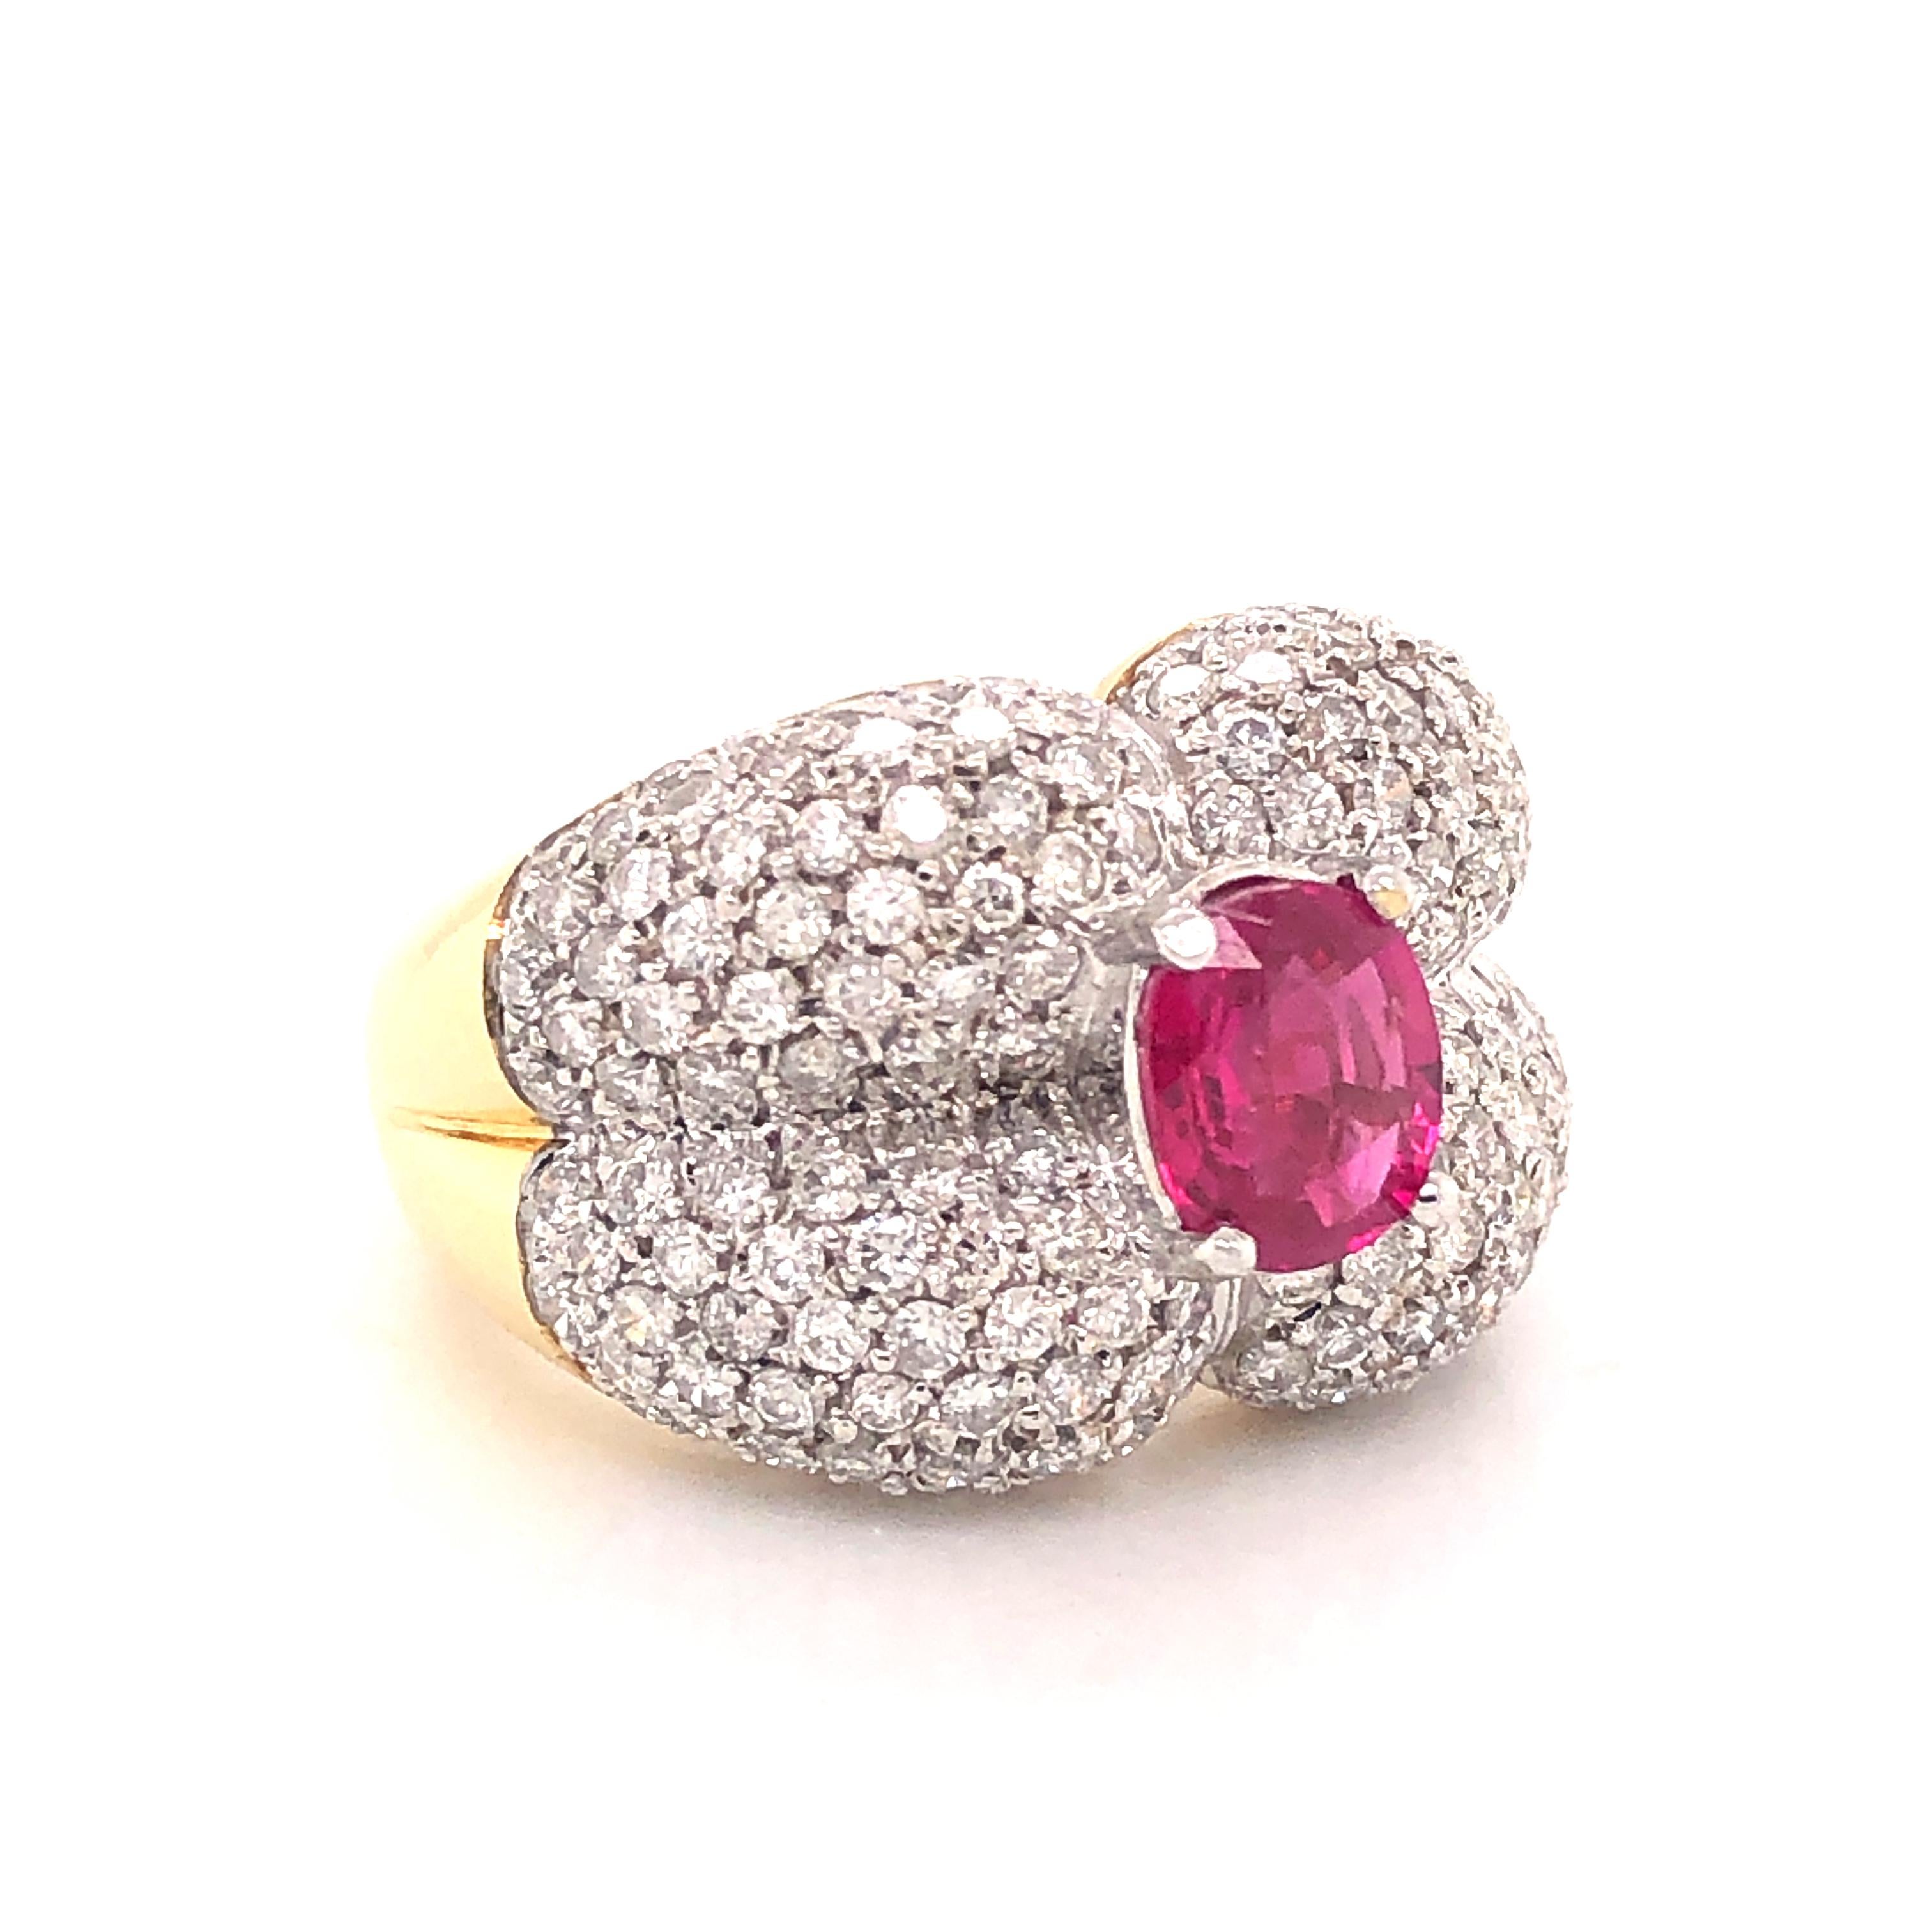 Amazing design on this show stopping Ruby and Diamond ring. Crafted in 18k gold this ring is highlighted with a vibrant red ruby. The ruby gemstone is oval in shape and weighs 1.32 ct.  Surrounding this ruby are all natural round brilliant cut